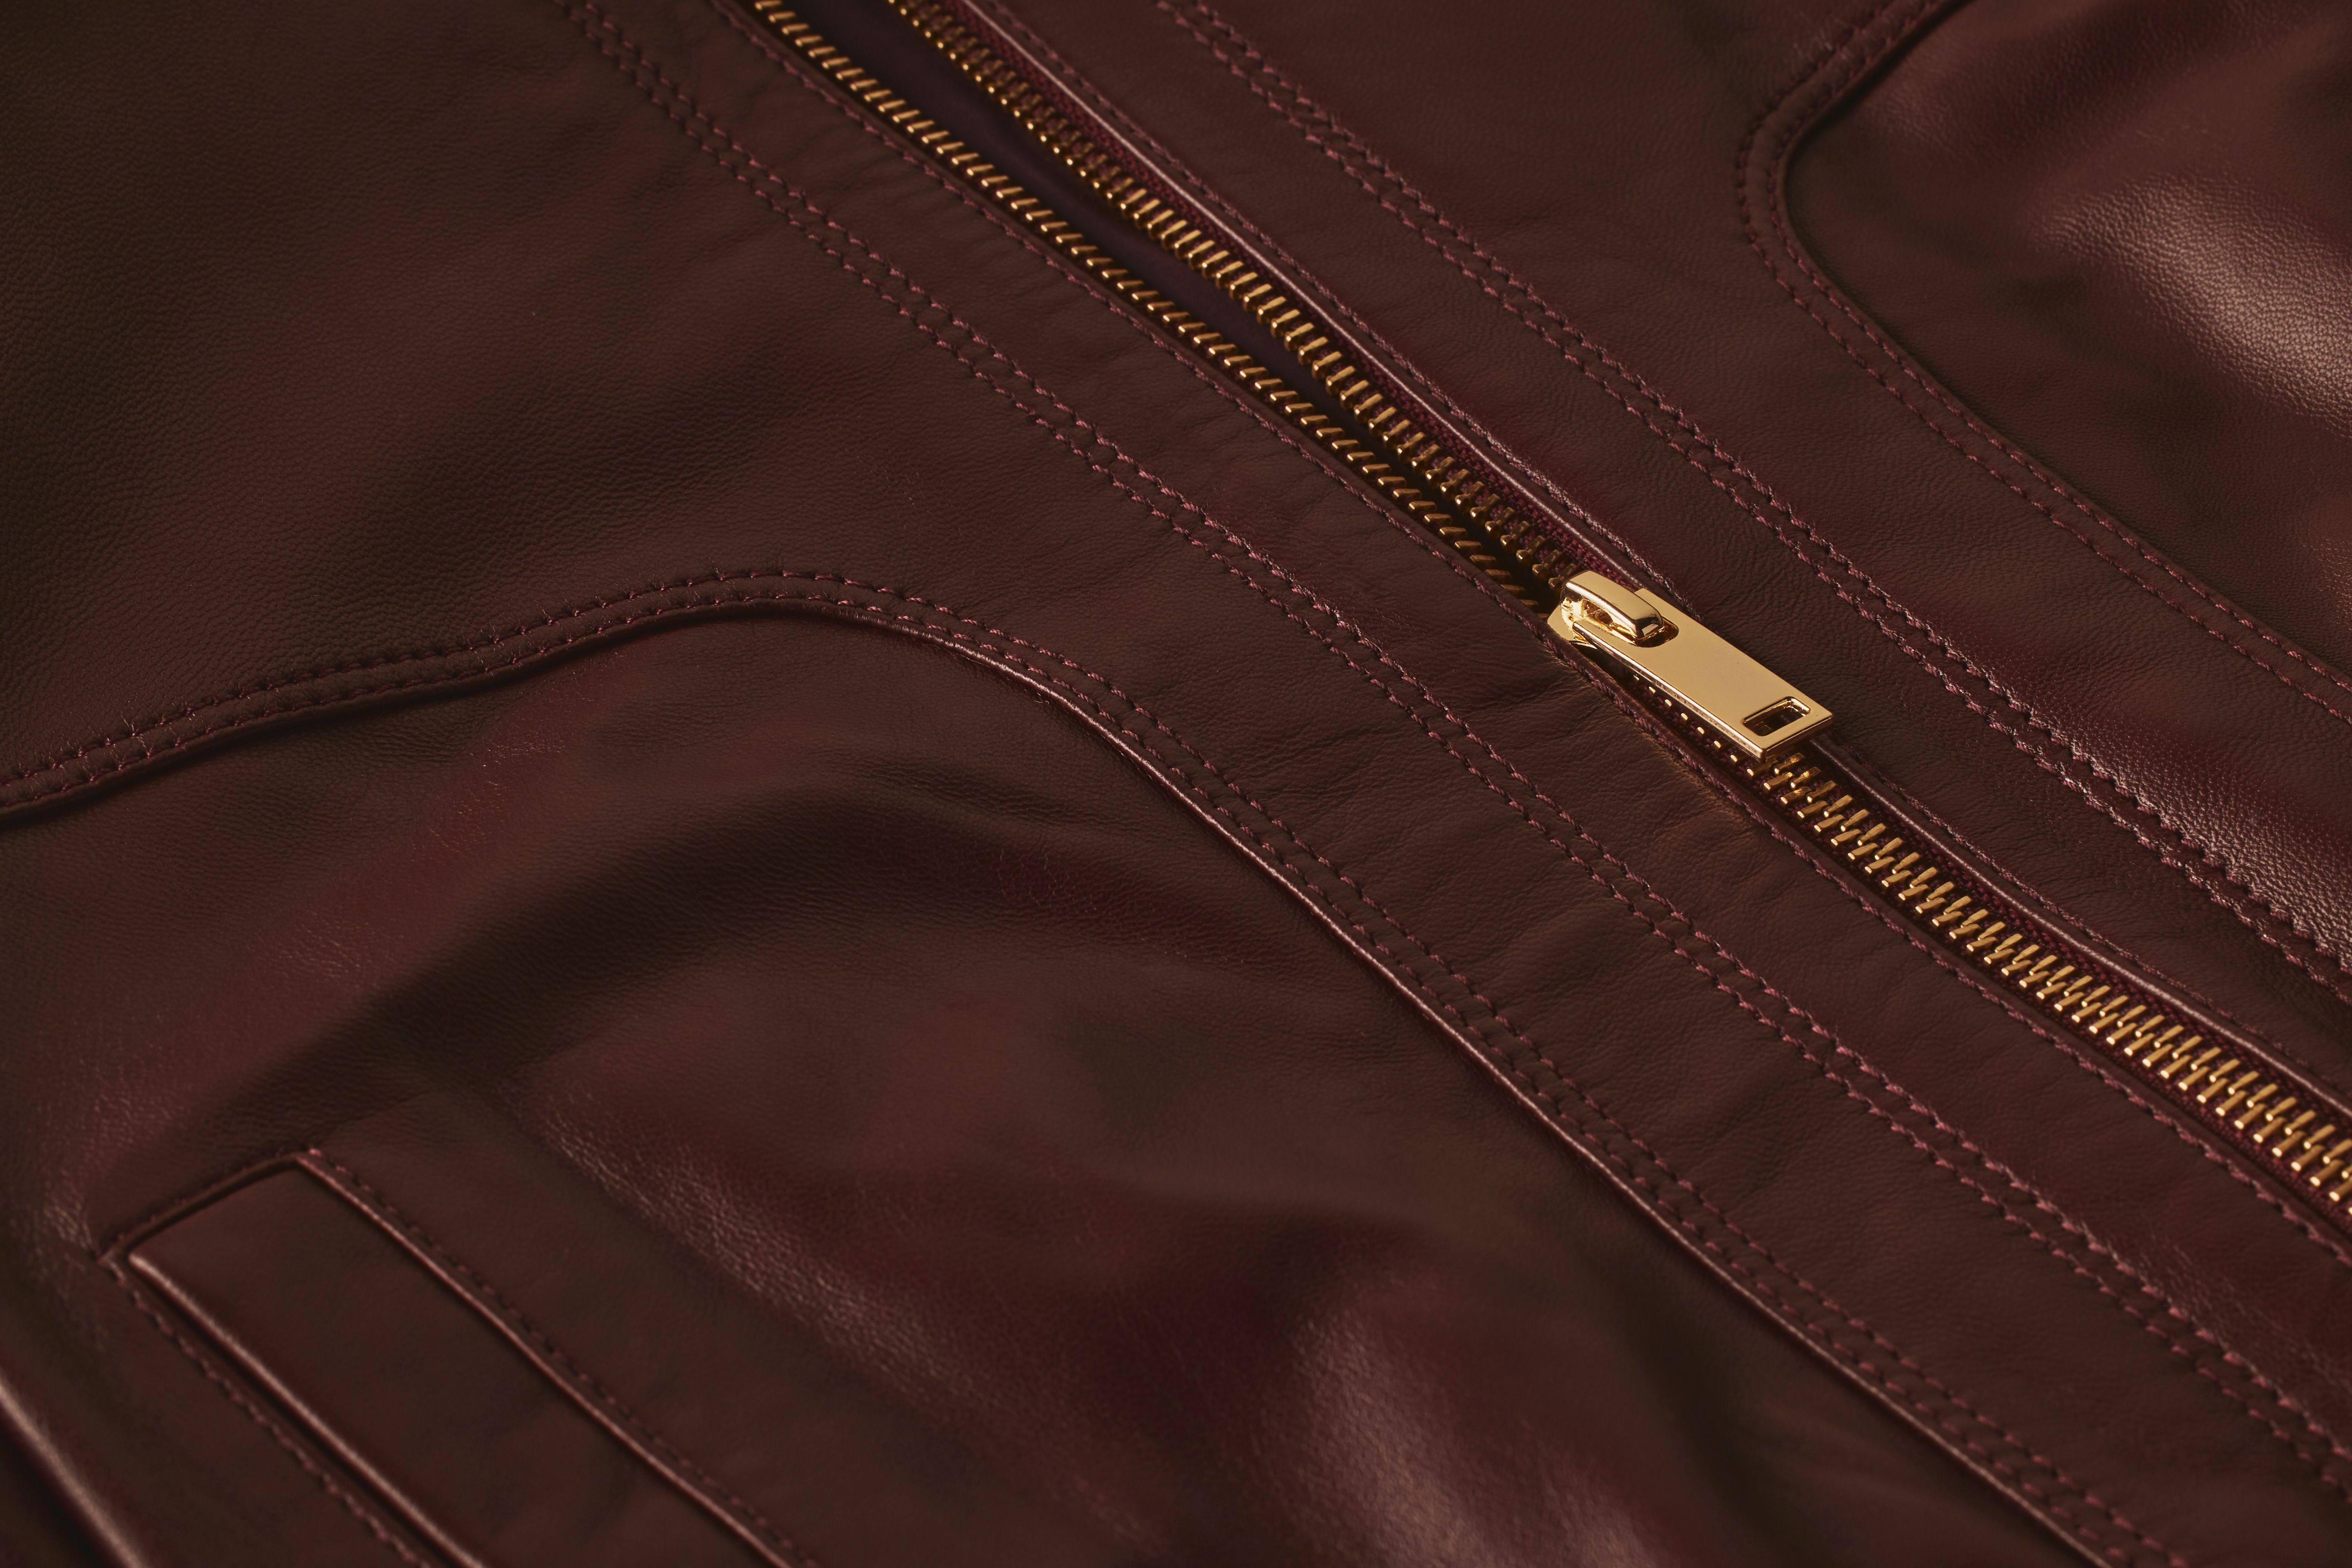 Scanlan Theodore leather bomber jacket with close detailed view of stitch detail and zipper. 